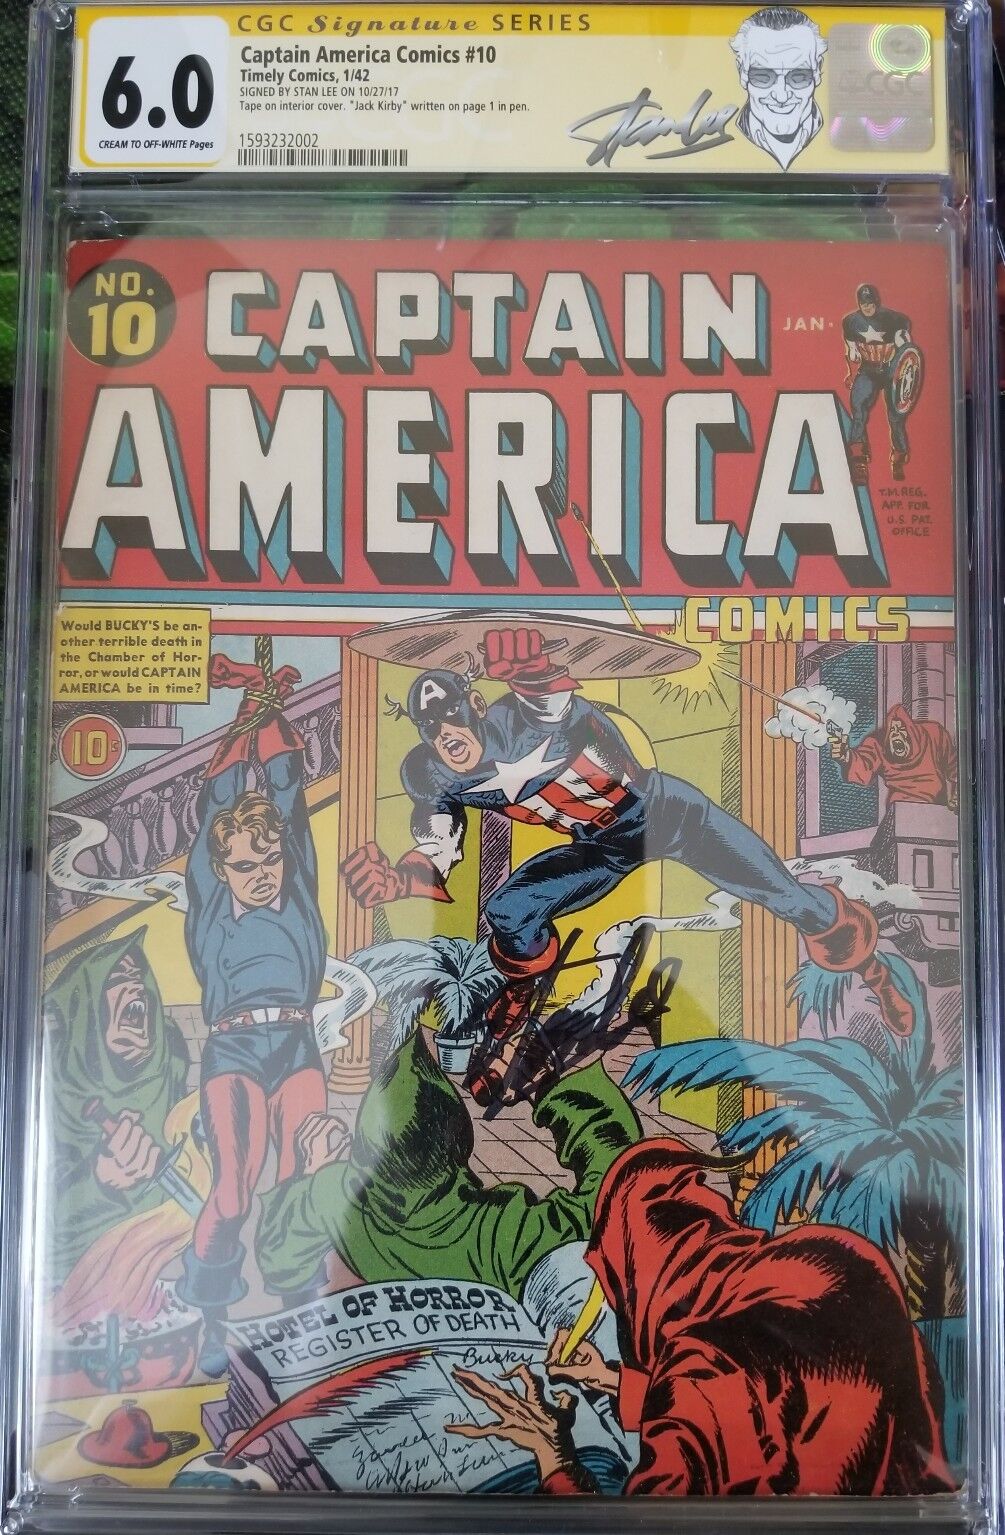 CAPTAIN AMERICA COMICS #10 CGC 6.0 Signed By Jack Kirby & Stan Lee 1 OF A KIND